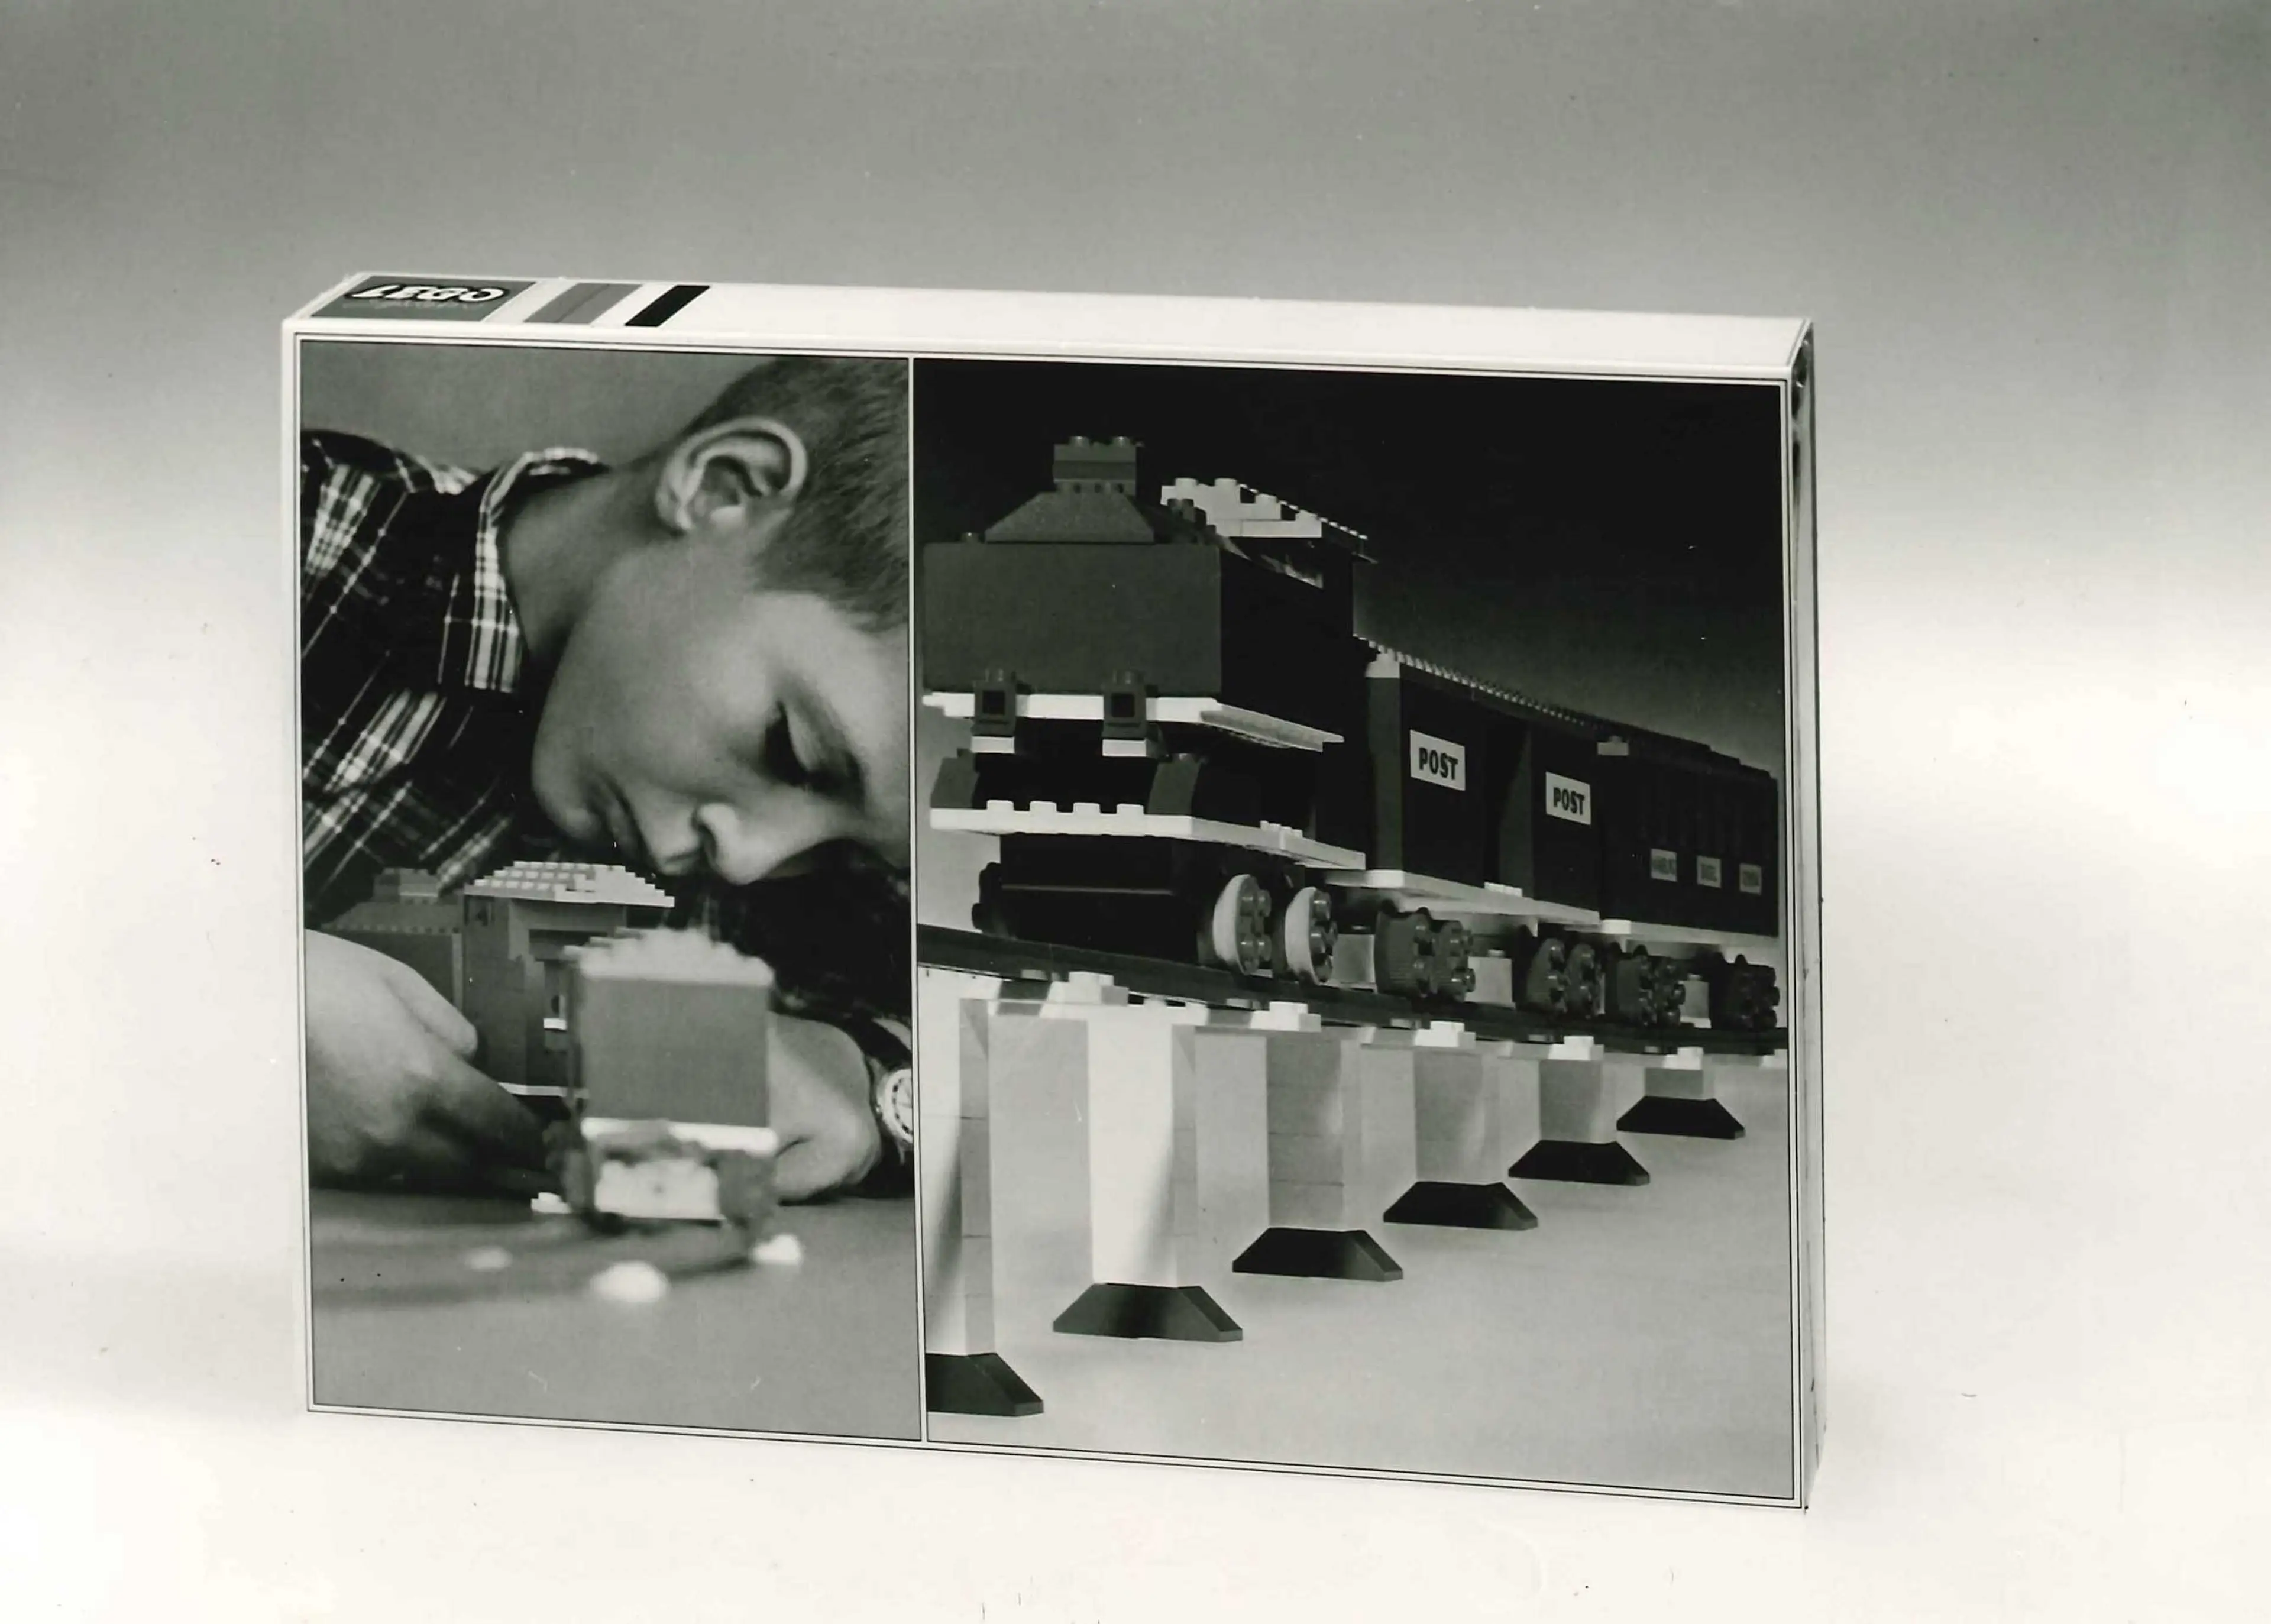 LEGO train set from 1966